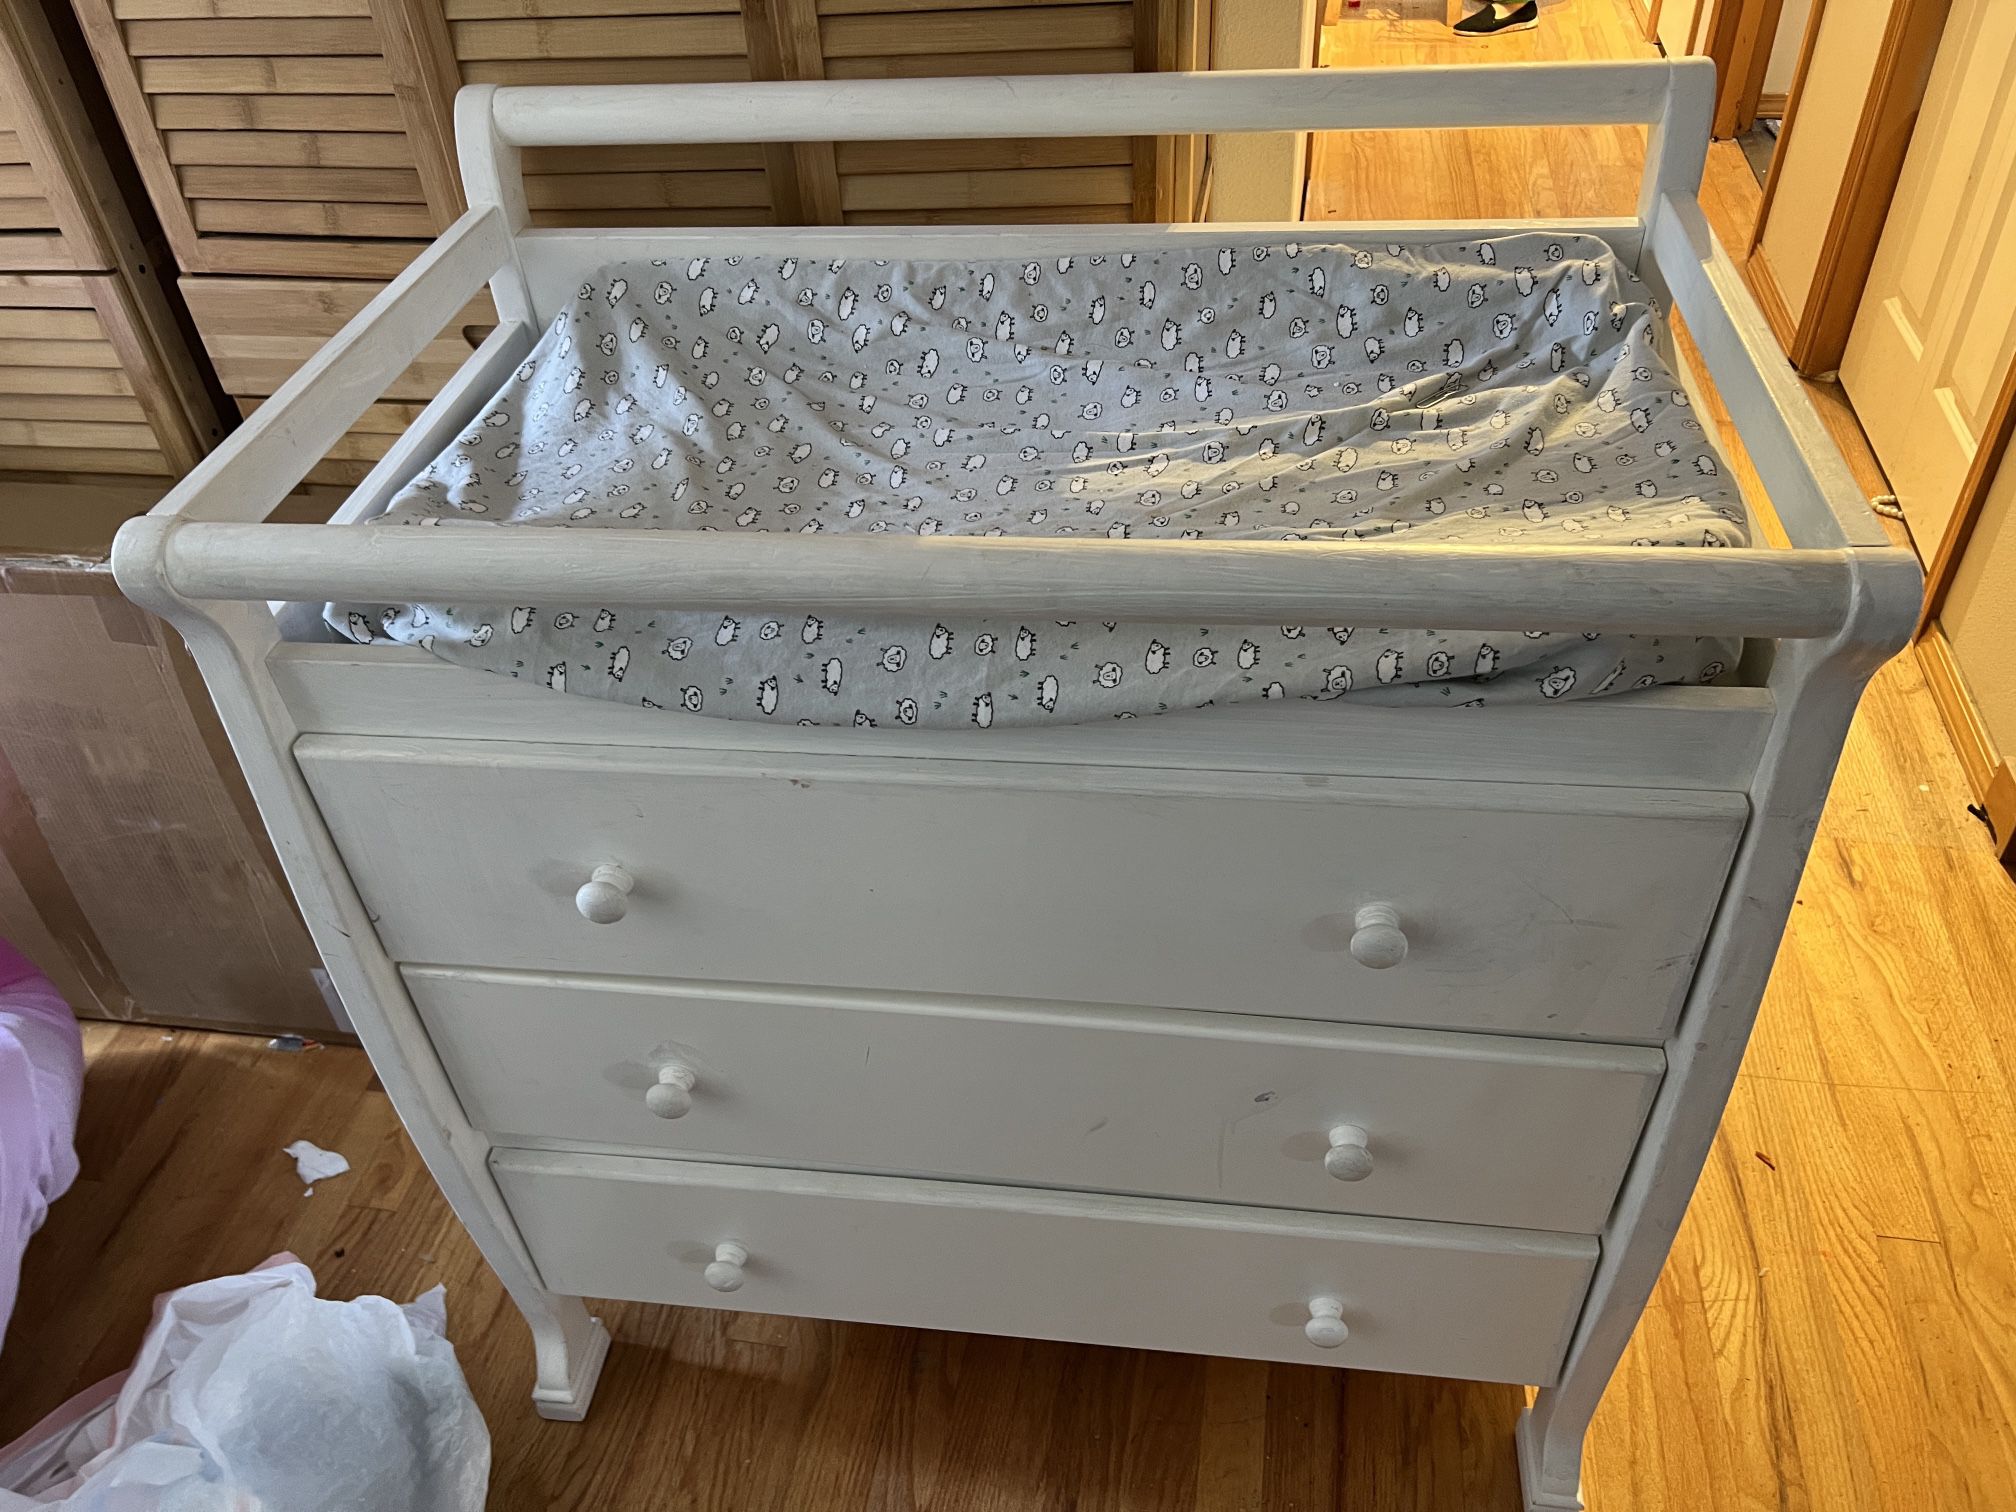 Change Table with Dresser and changing pad